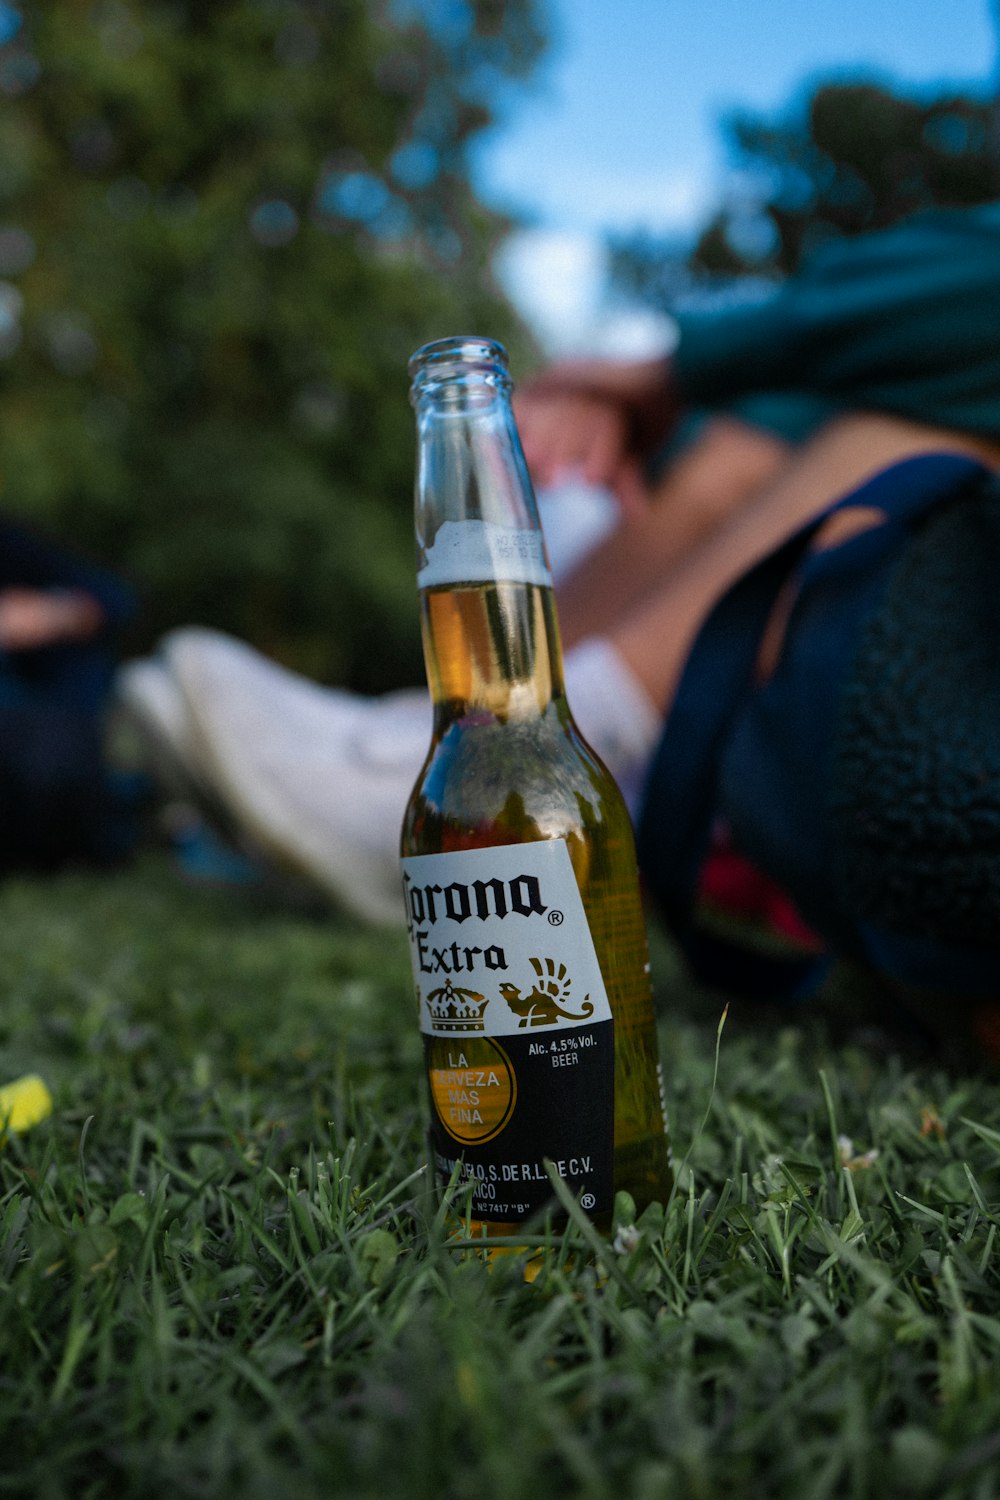 corona extra beer bottle on green grass